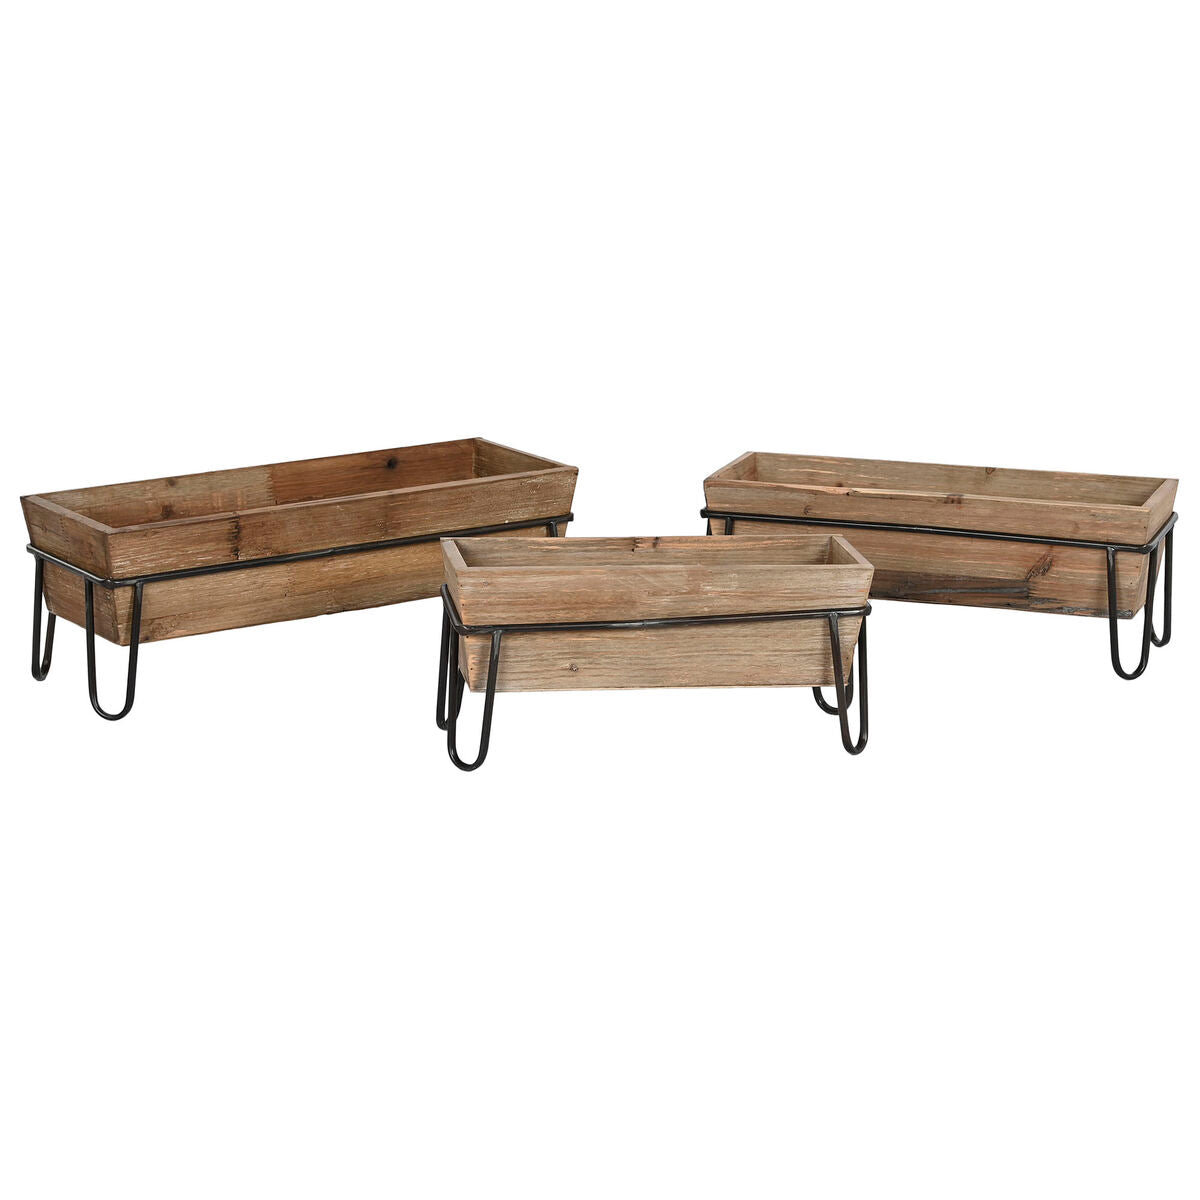 Set of Planters in Wood and Metal and Cottage style (55 x 21 x 18,5 cm)